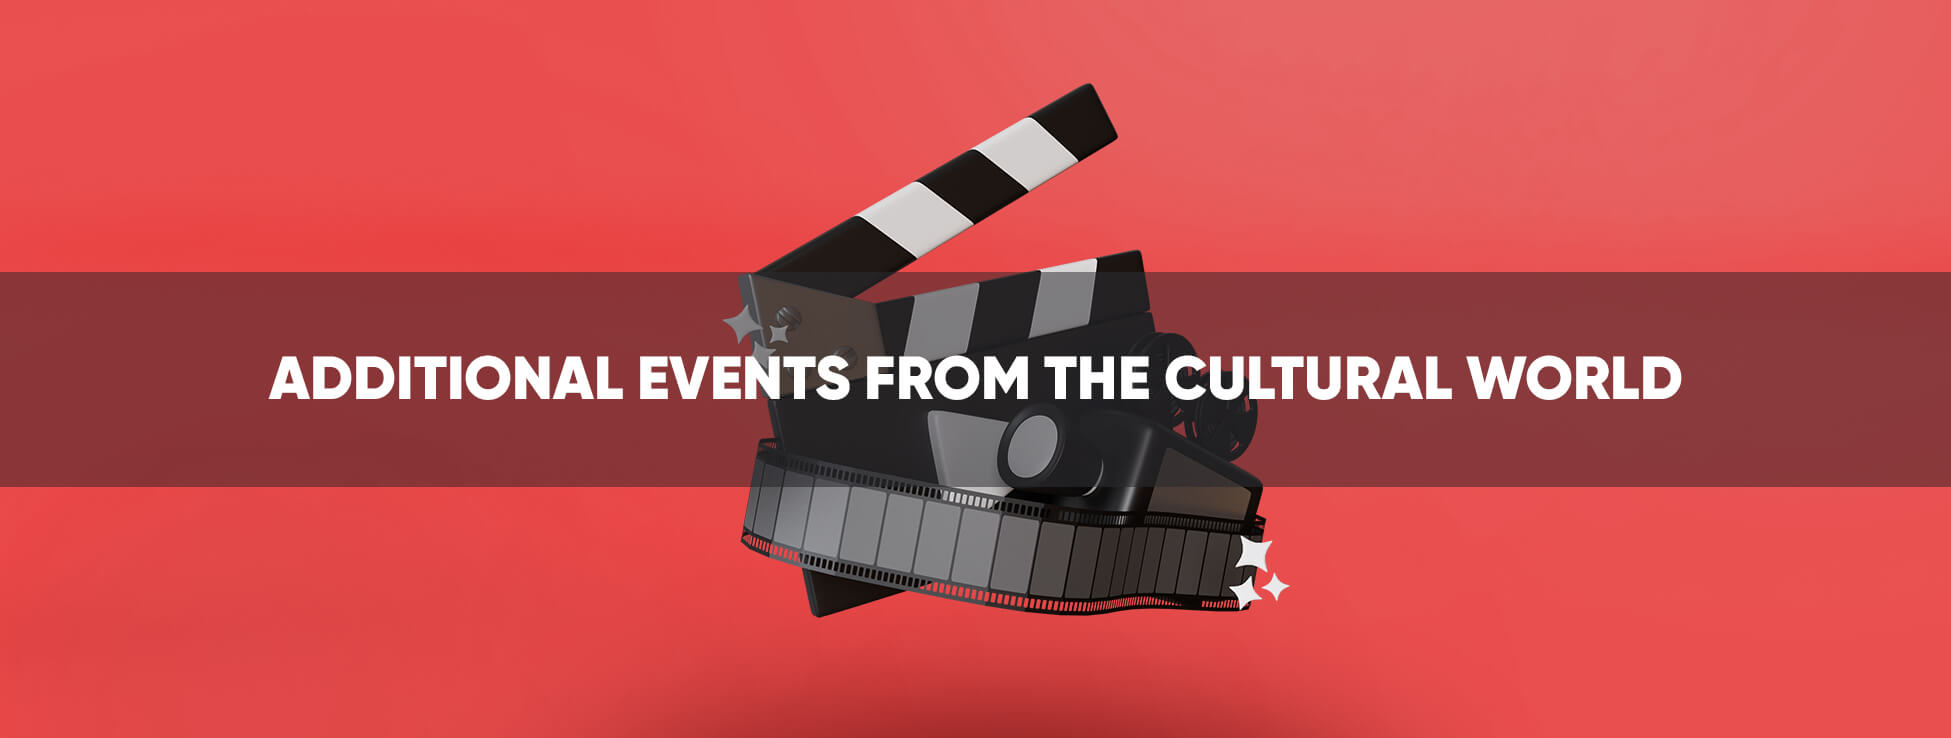 Additional events from the cultural world